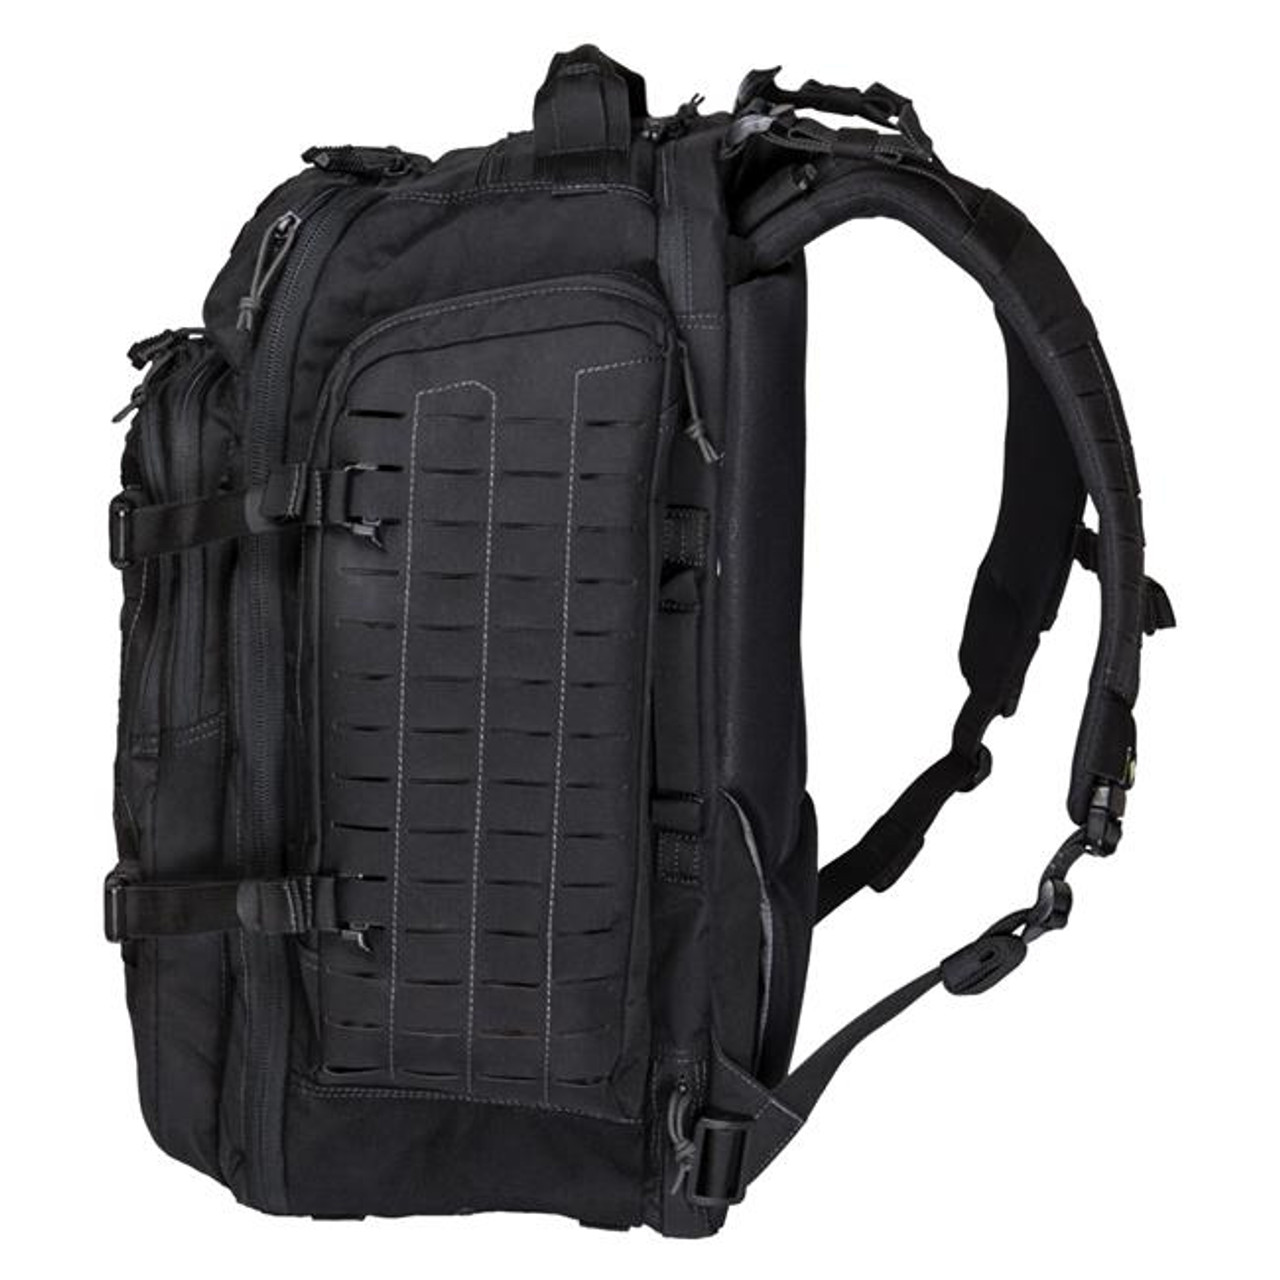 Black Tactix 3 Day Backpack | Military Luggage